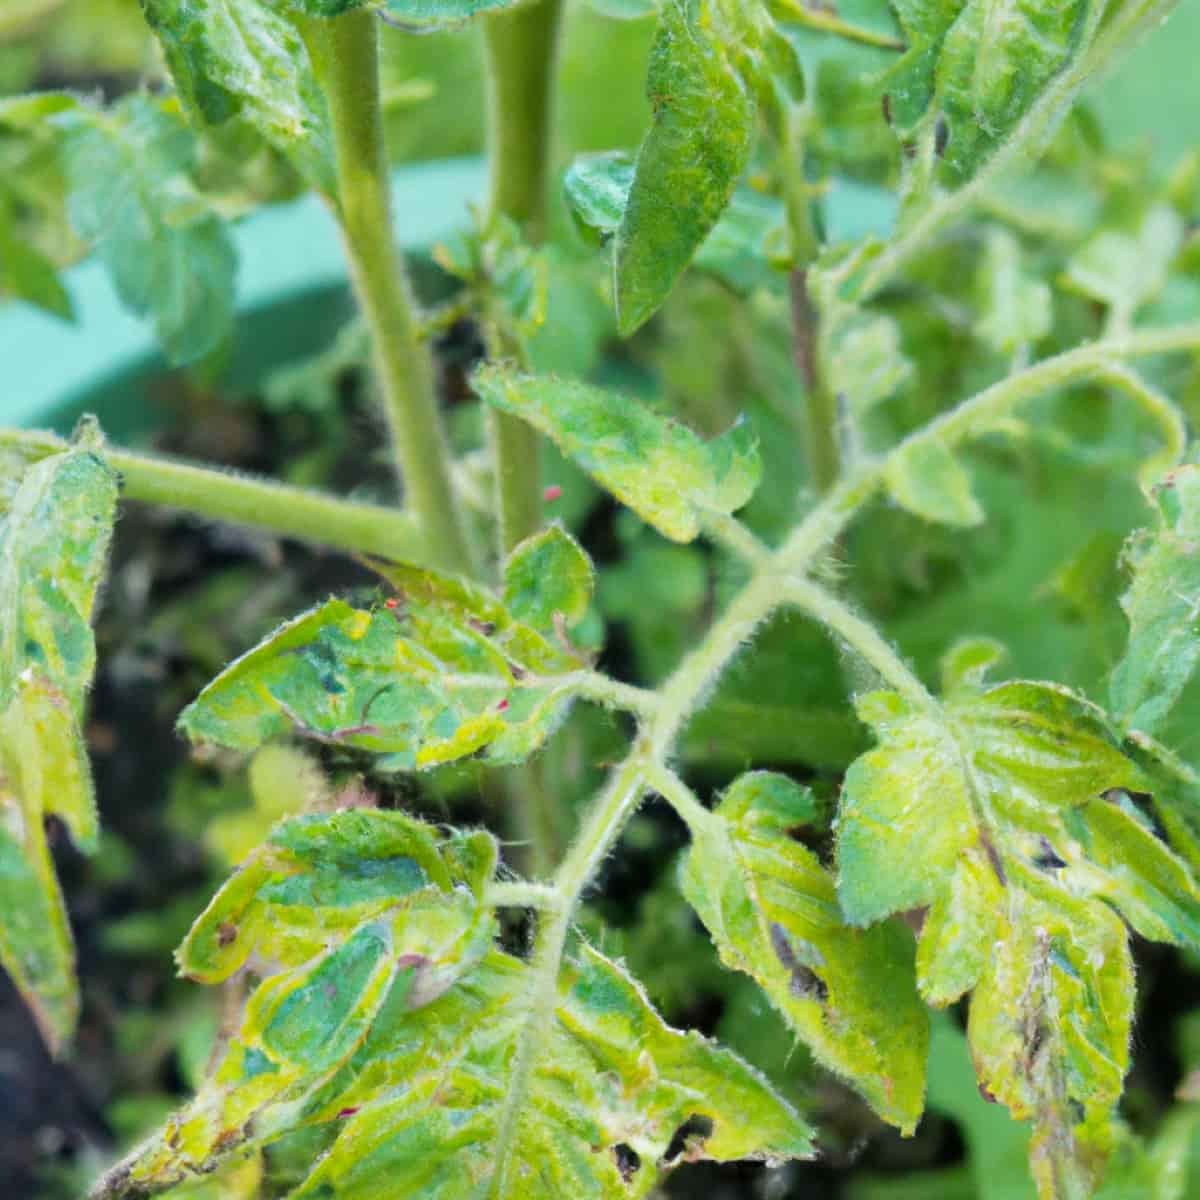  early Blight Incidence in Tomatoes